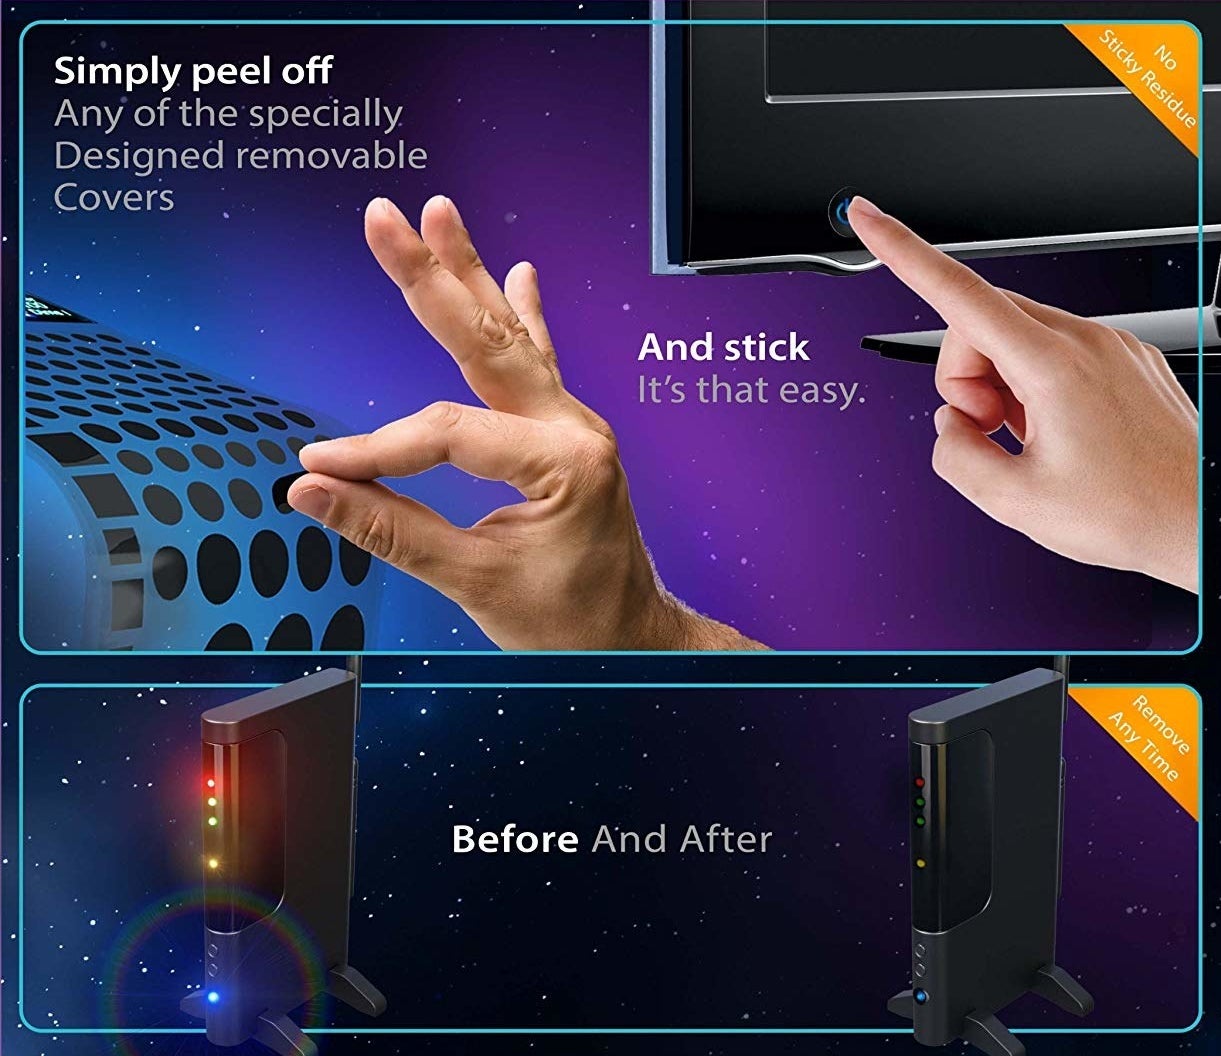 Infographic showing the stickers being placed on electronics with bright lights and dimming the brightness